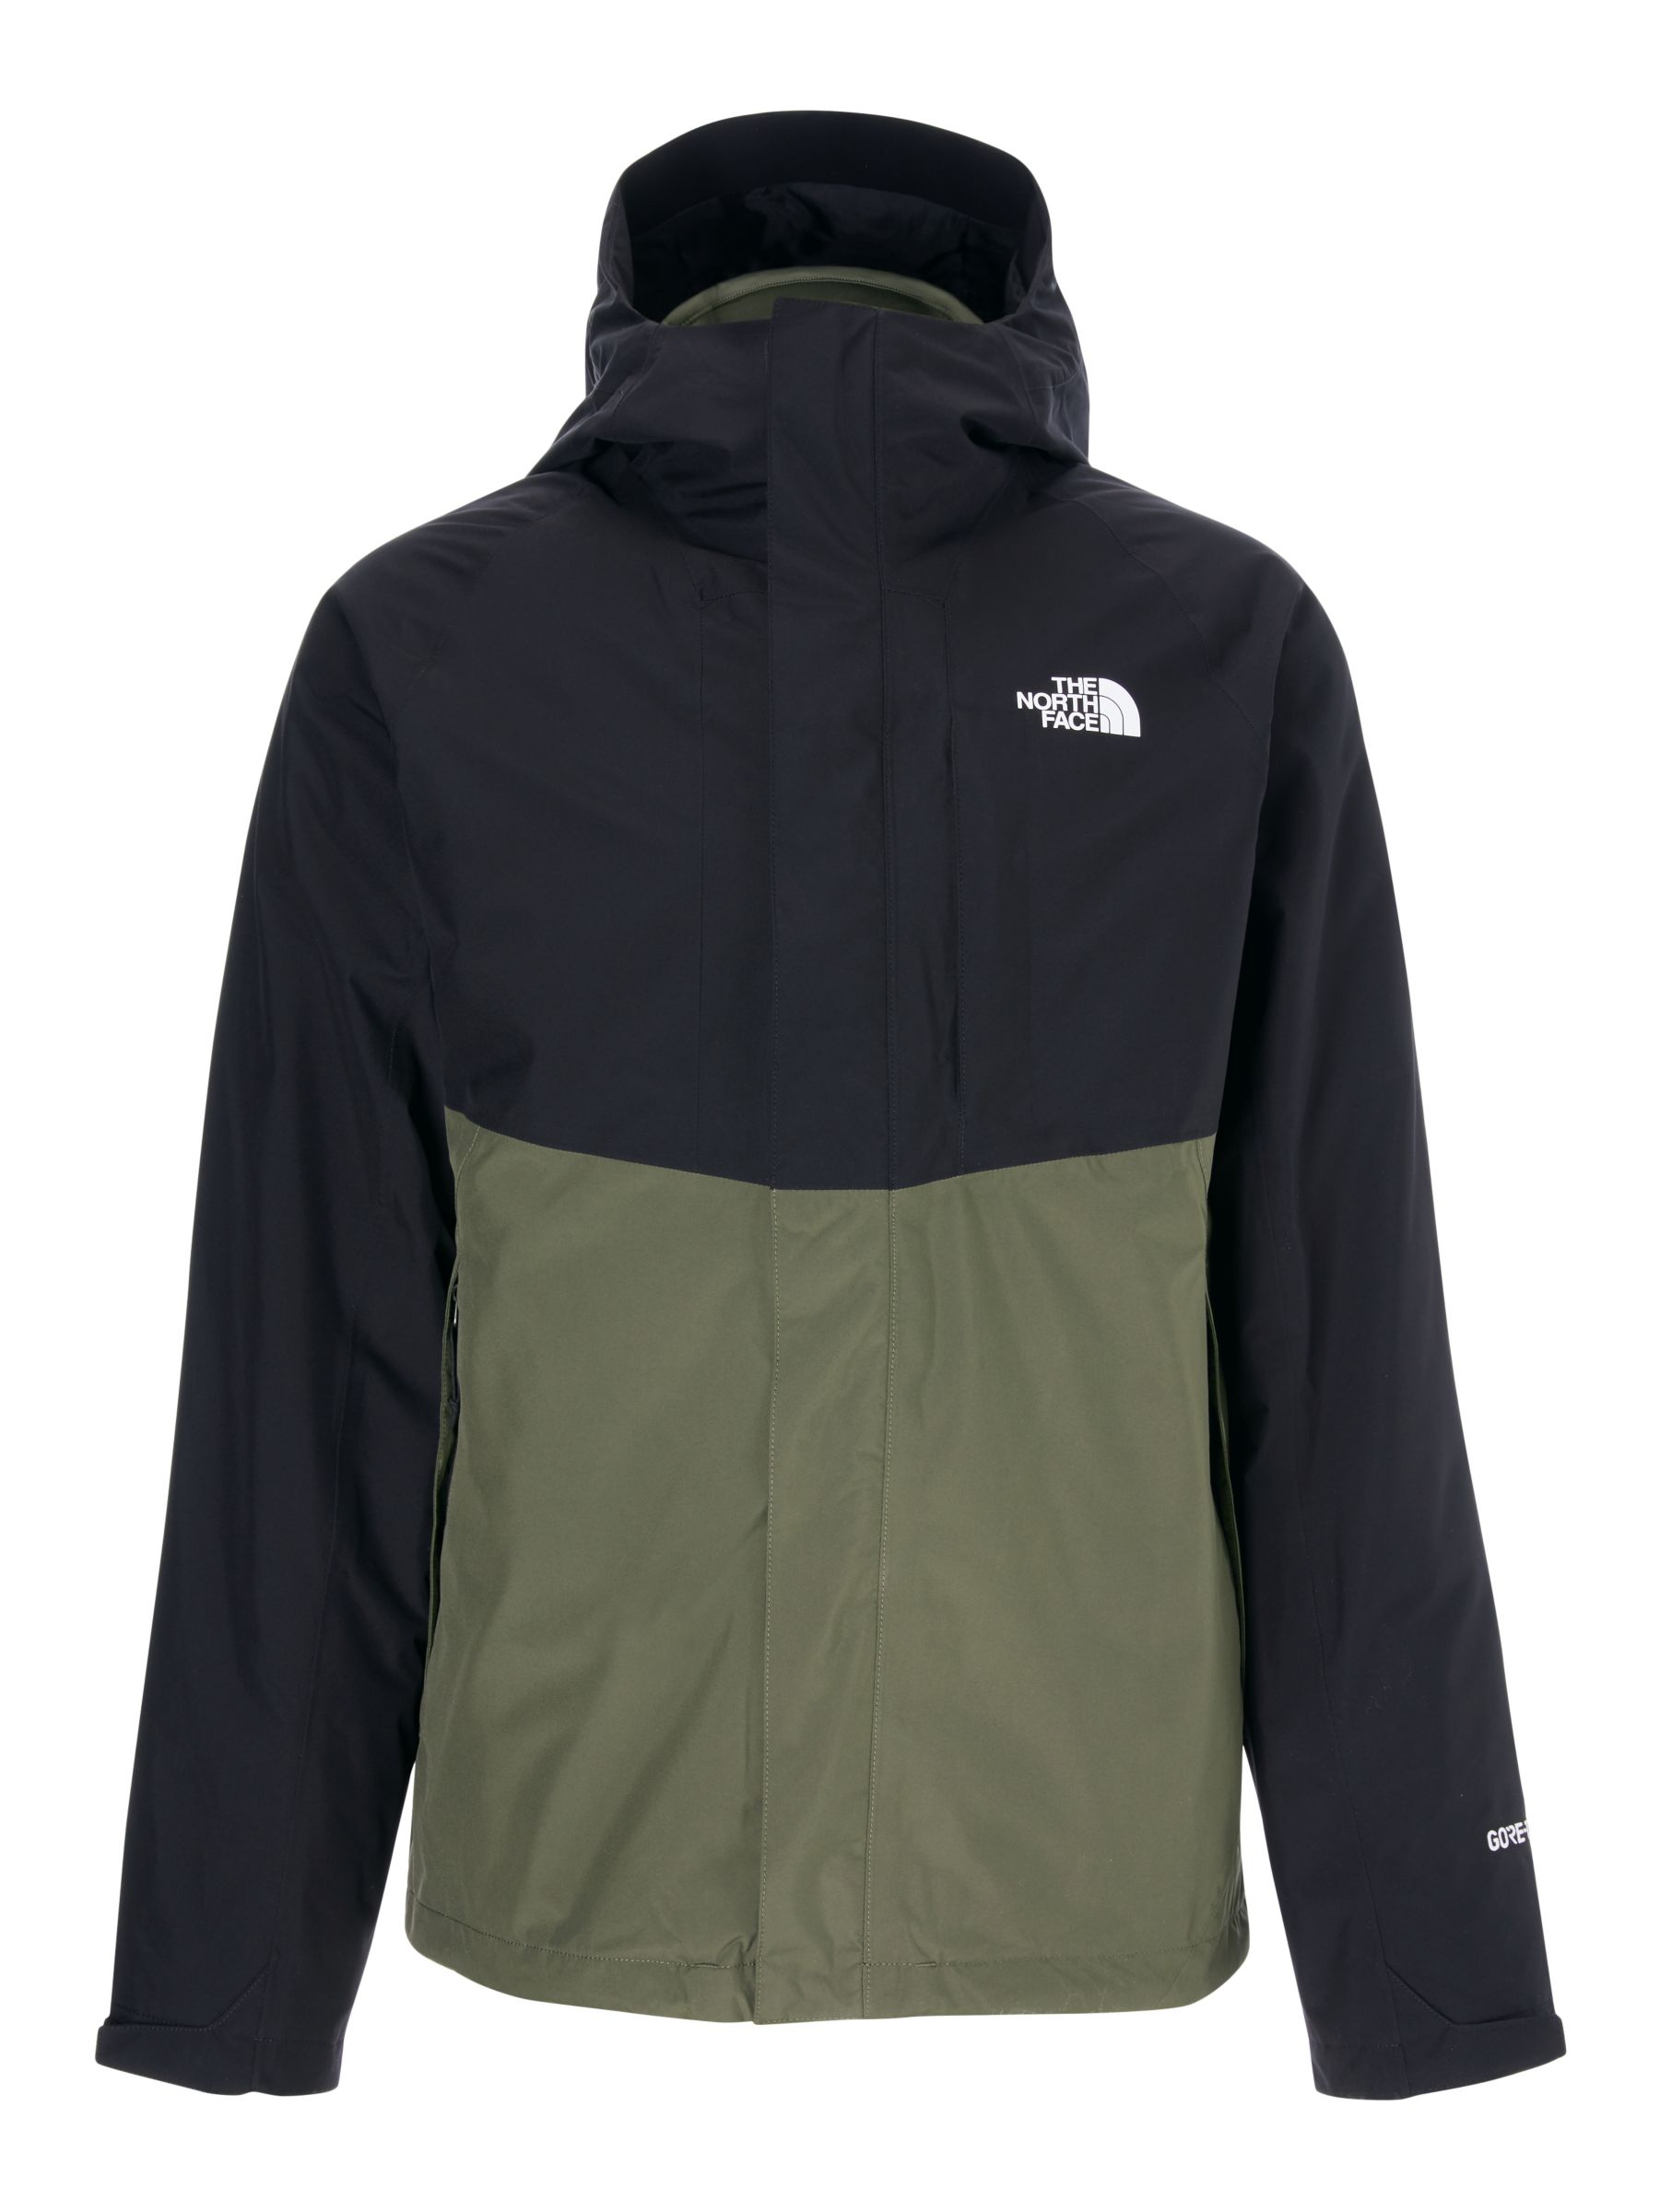 the north face gore tex jacket